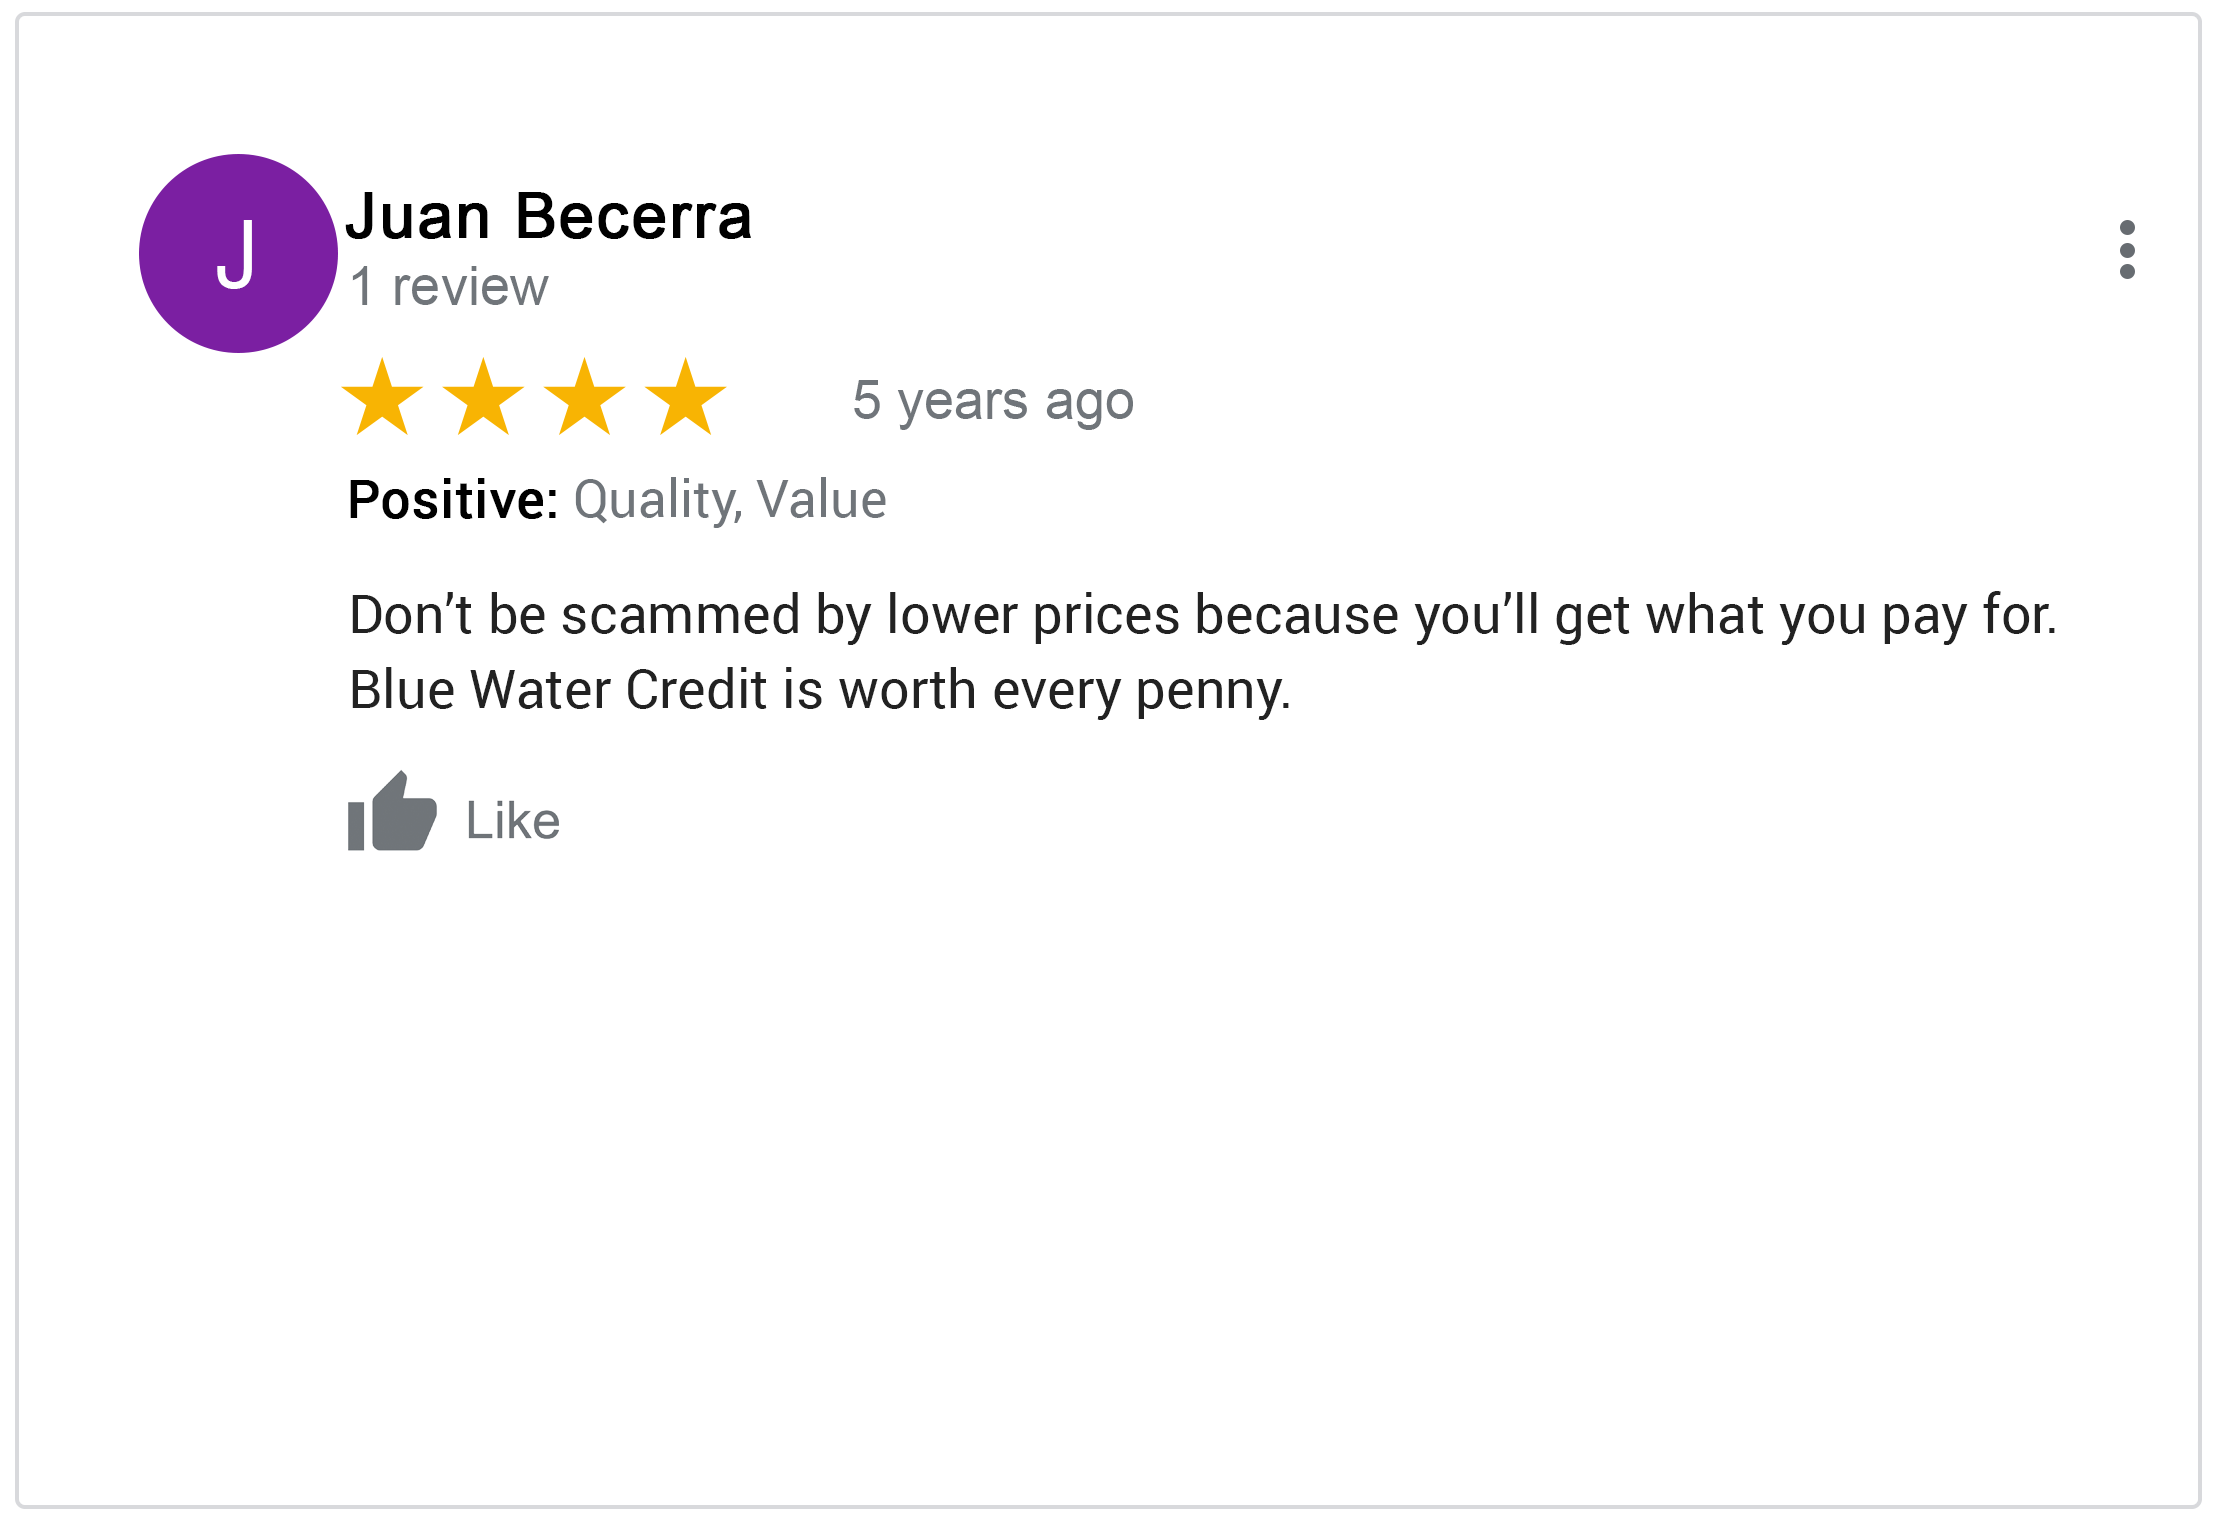 Check out the more reviews on Google!